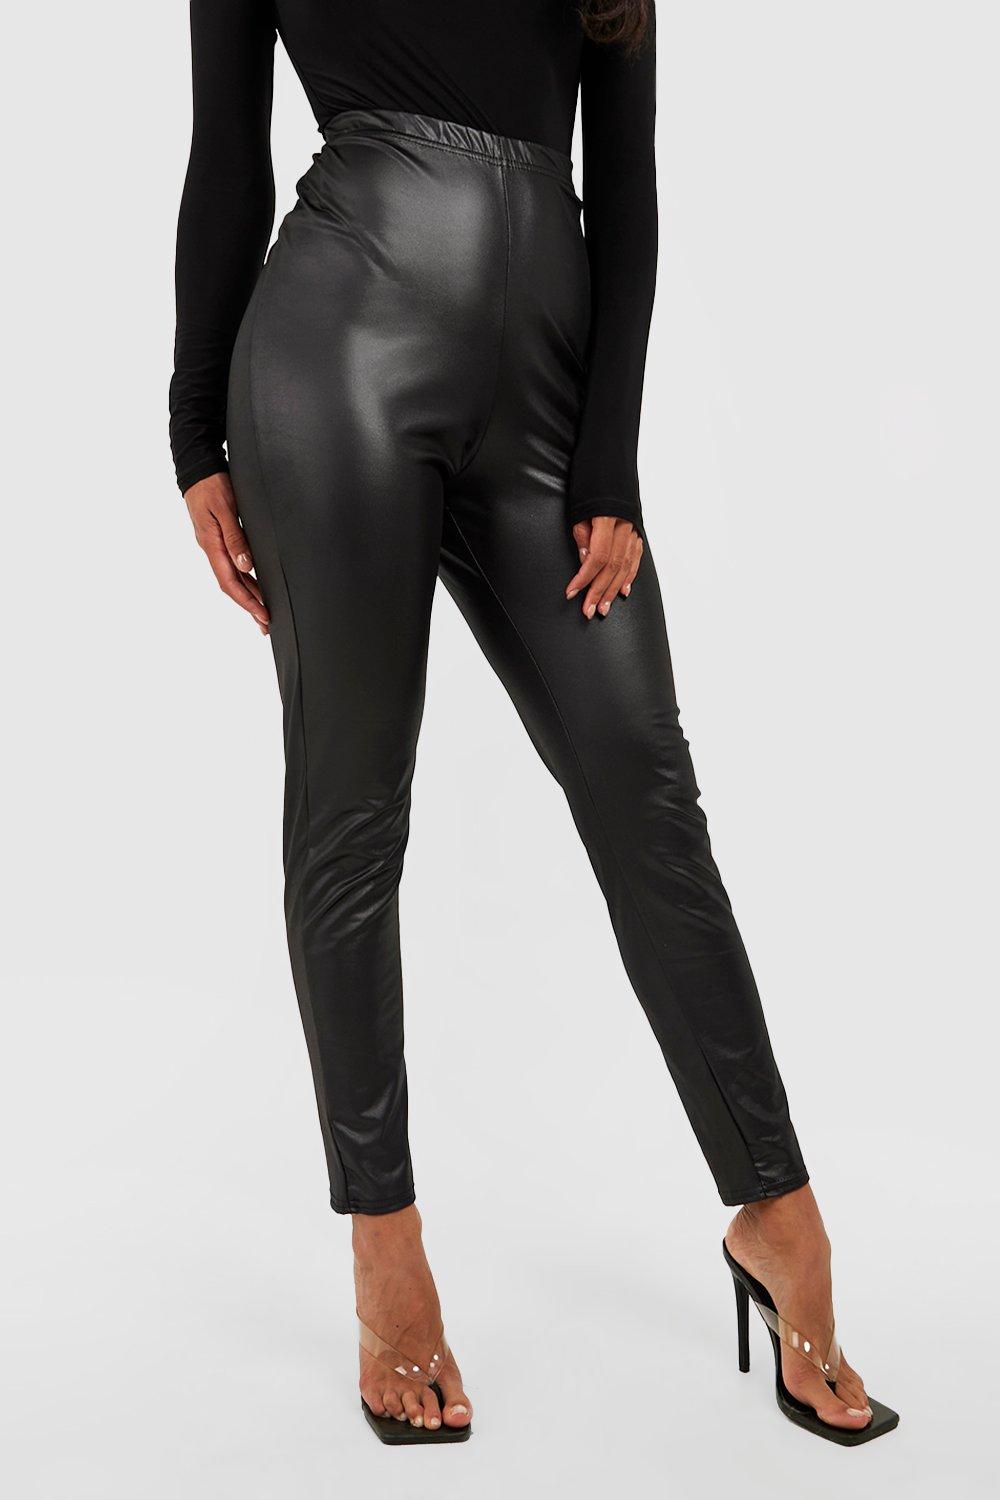 The High Waisted Faux Leather Leggings –